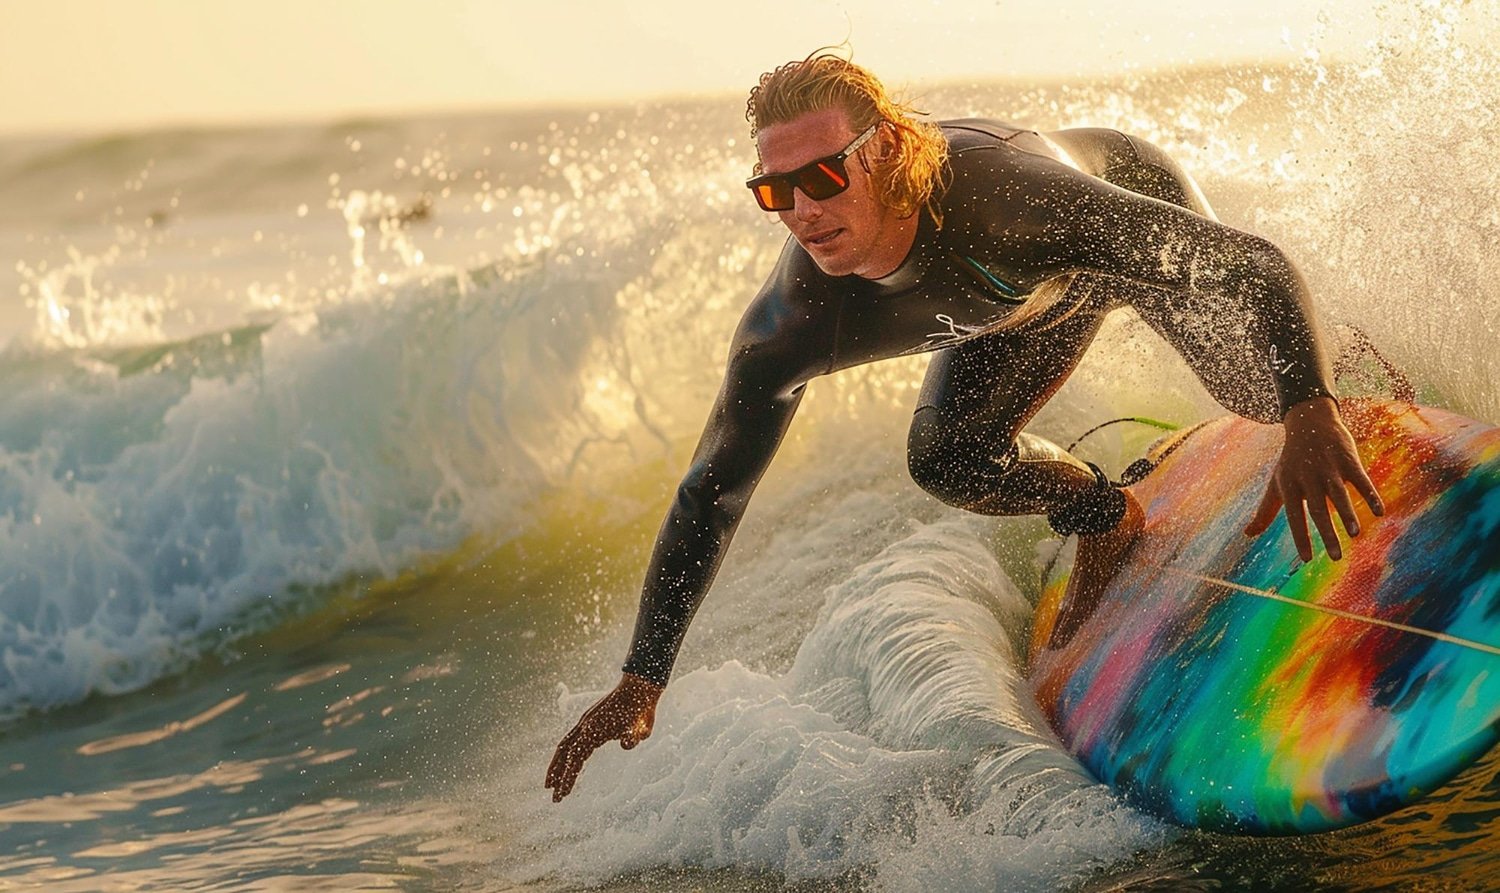 Surf In Style With Katin USA’s Authentic Surf Apparel